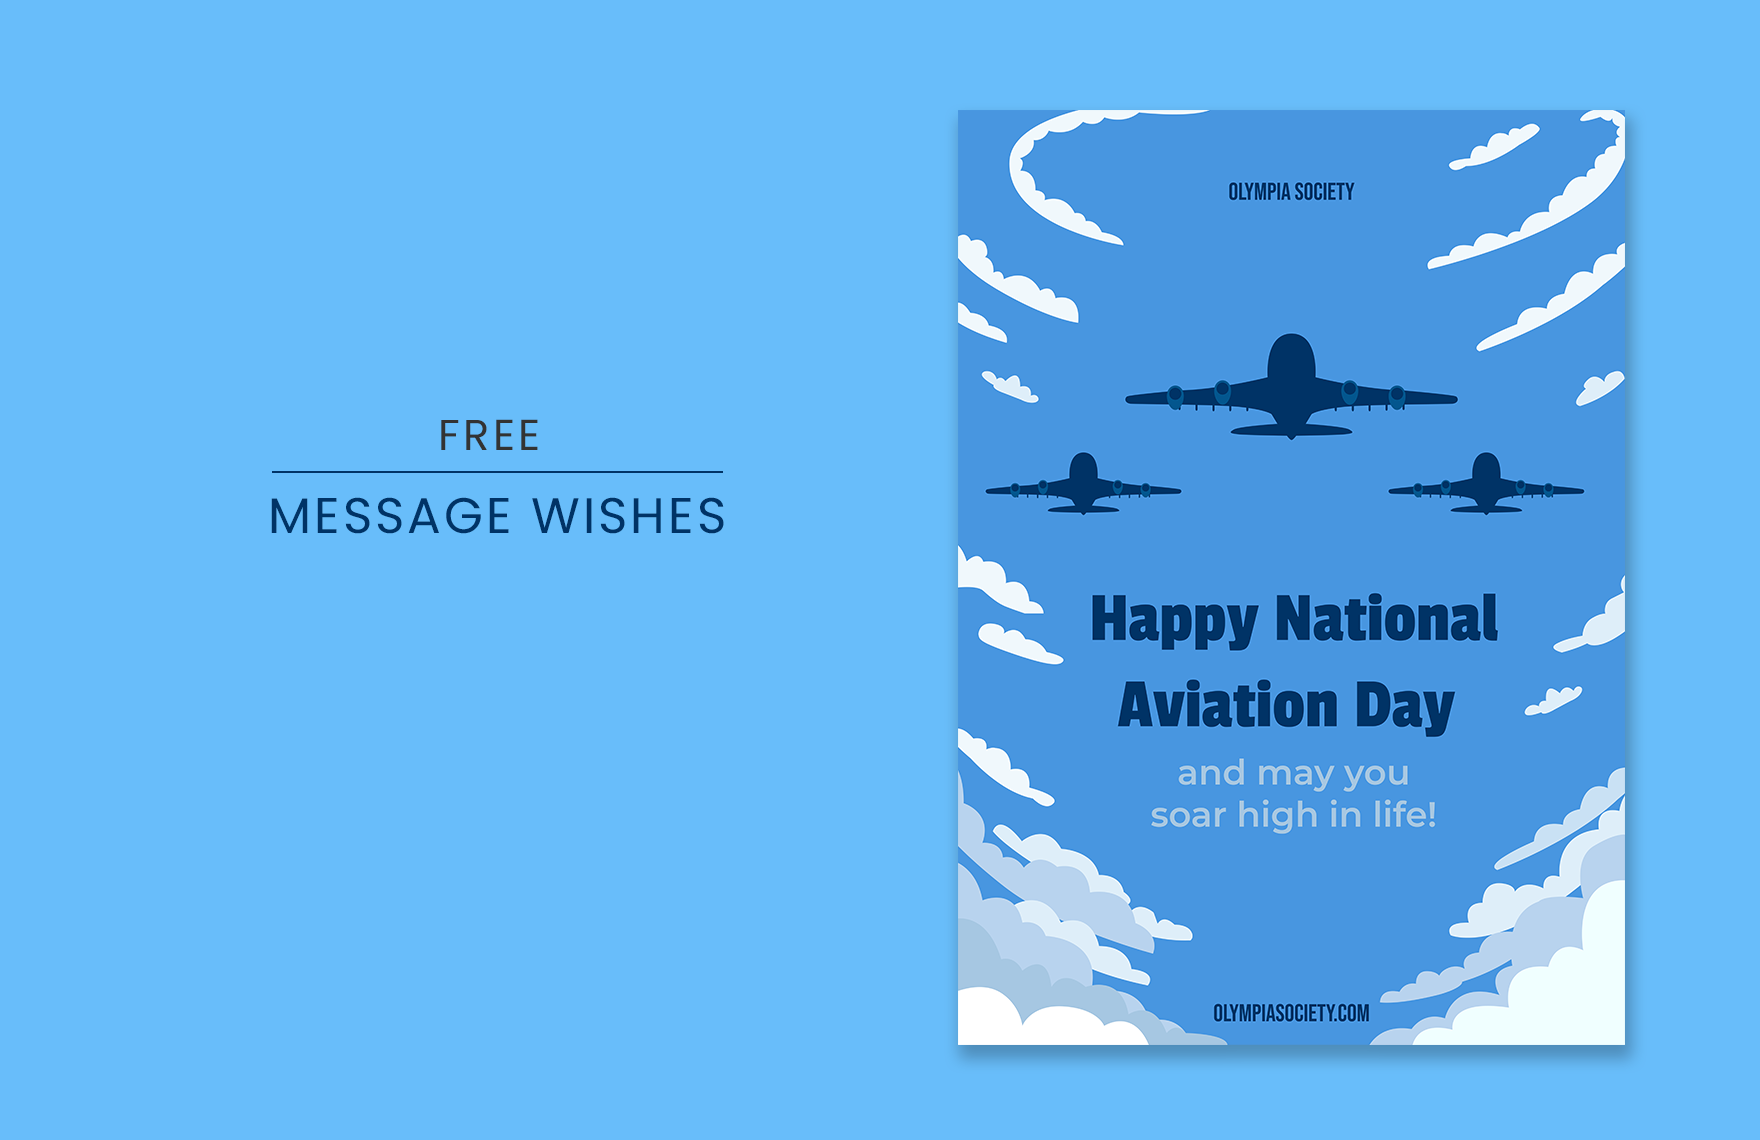 Free National Aviation Day Message Wishes Template in PDF, Illustrator, SVG, PNG